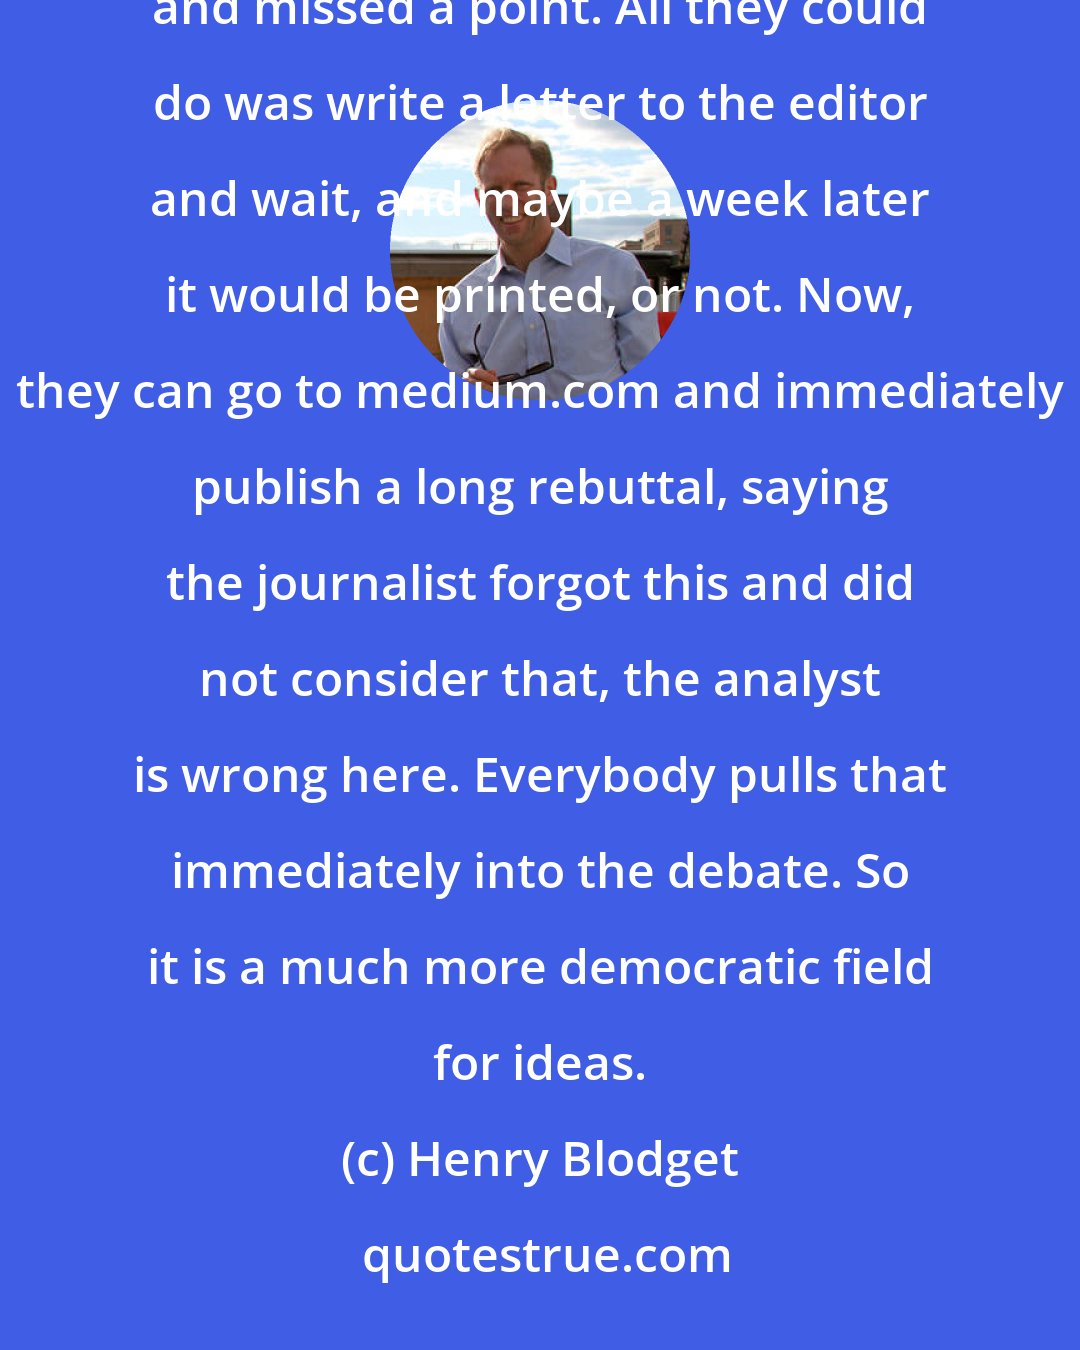 Henry Blodget: Before the internet, a journalist would write an article about a company that the company felt was unfair and missed a point. All they could do was write a letter to the editor and wait, and maybe a week later it would be printed, or not. Now, they can go to medium.com and immediately publish a long rebuttal, saying the journalist forgot this and did not consider that, the analyst is wrong here. Everybody pulls that immediately into the debate. So it is a much more democratic field for ideas.